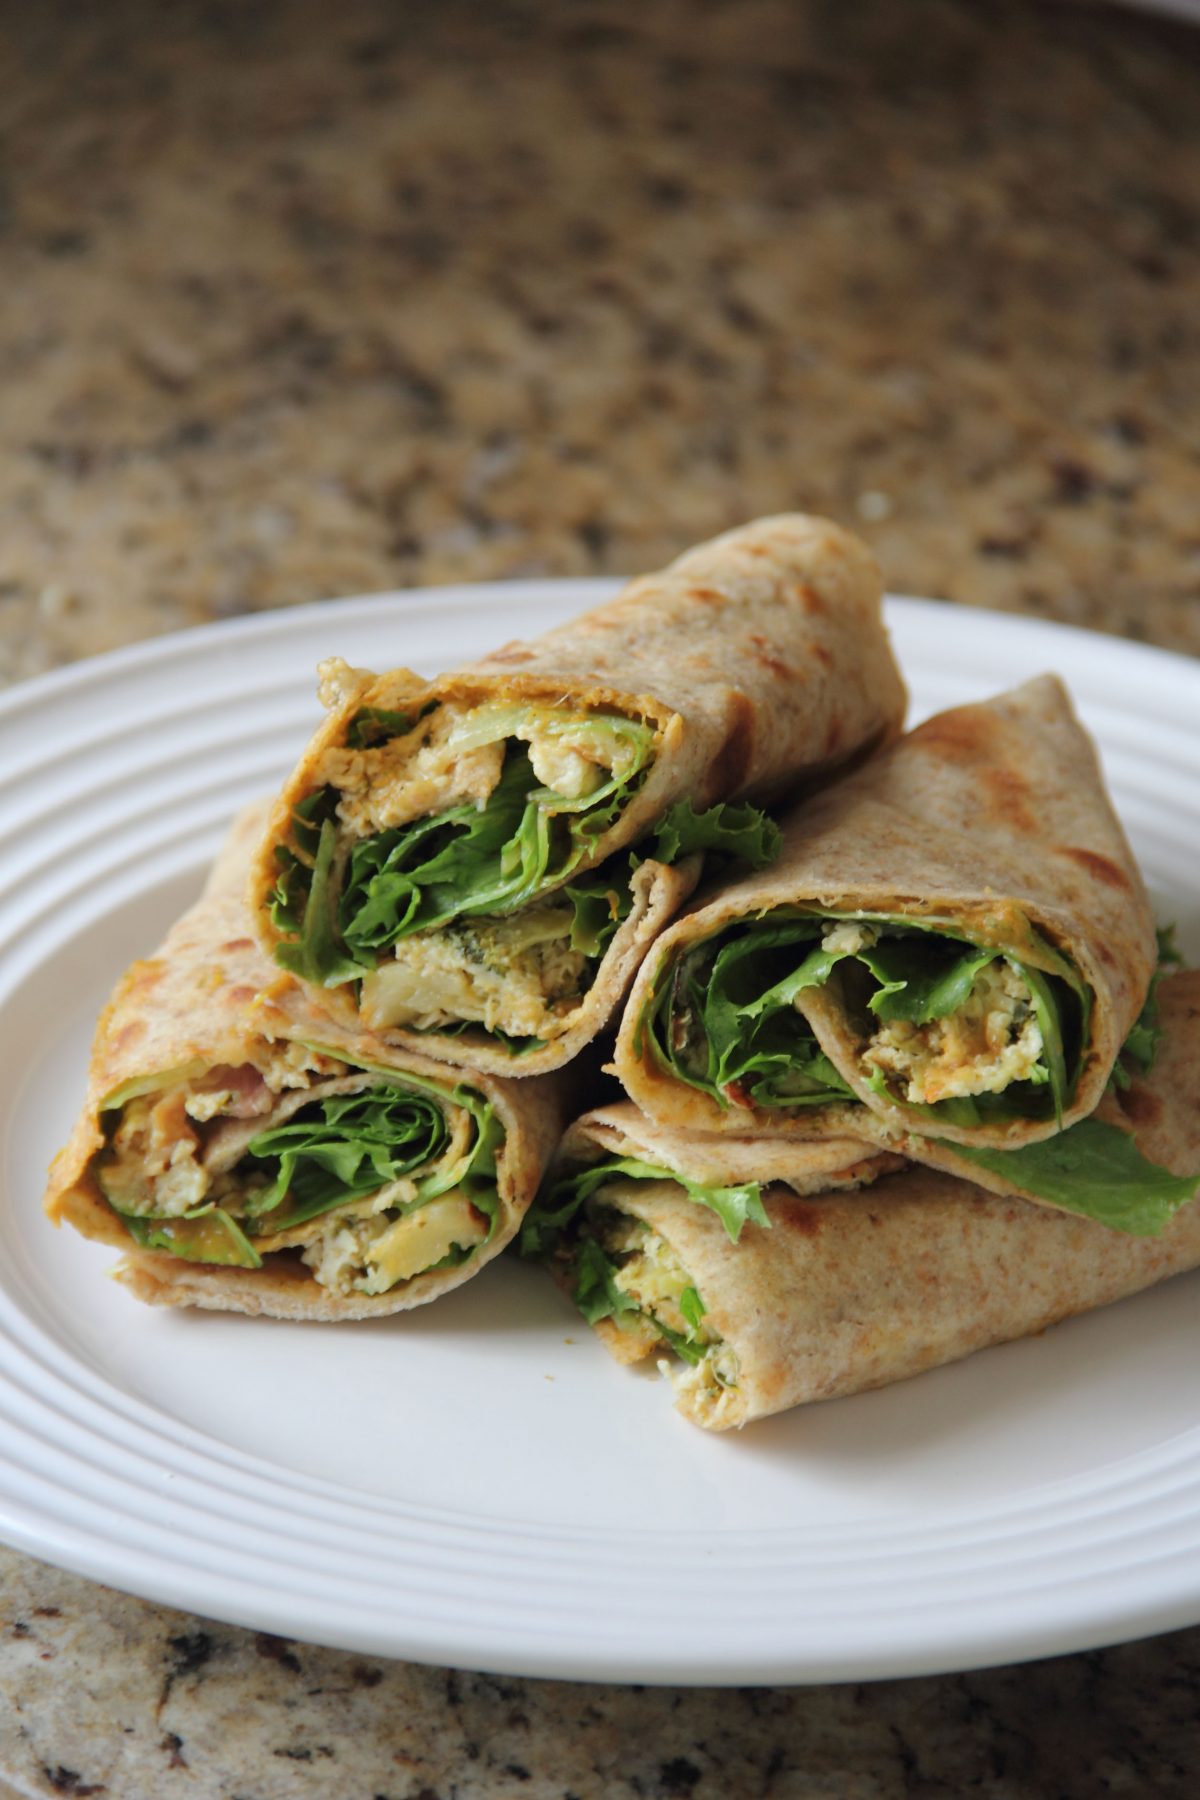 Fry-up of quiche made into wraps (Photo by Cynthia Nelson)
